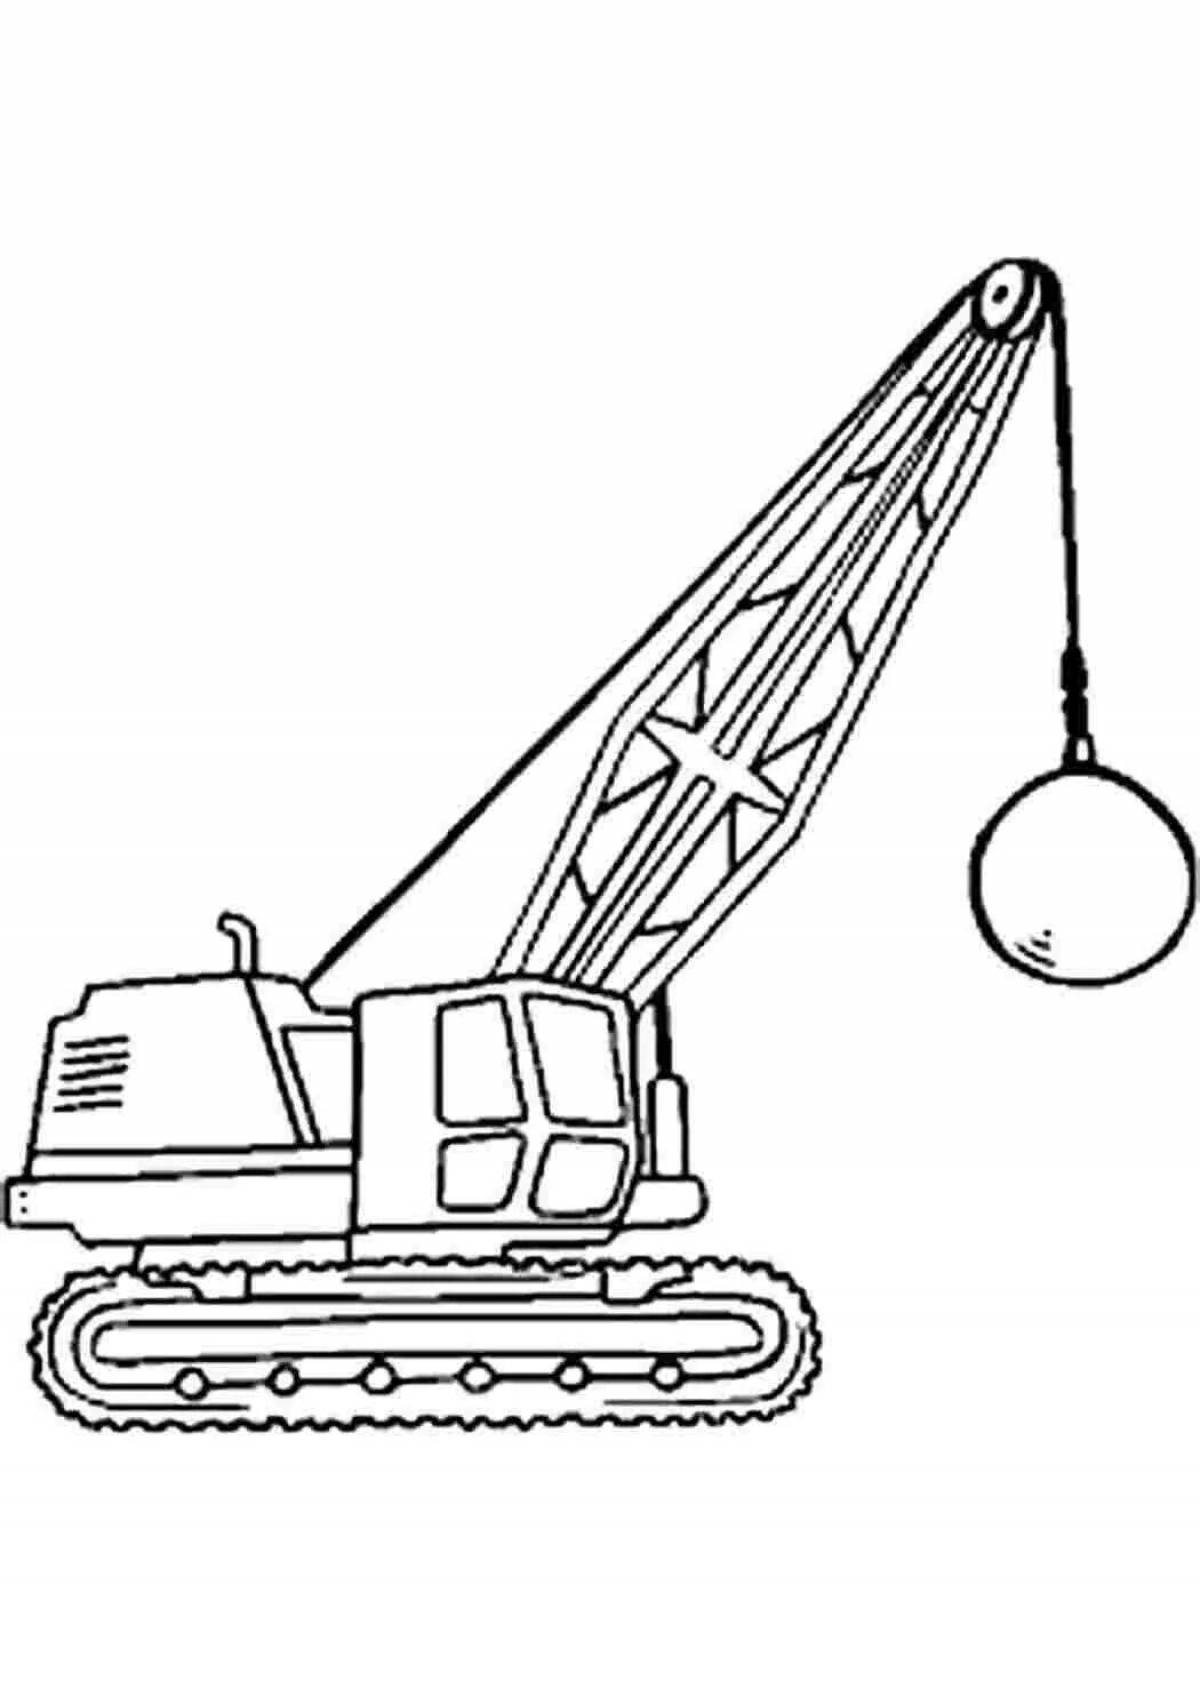 Tempting drilling machine coloring page